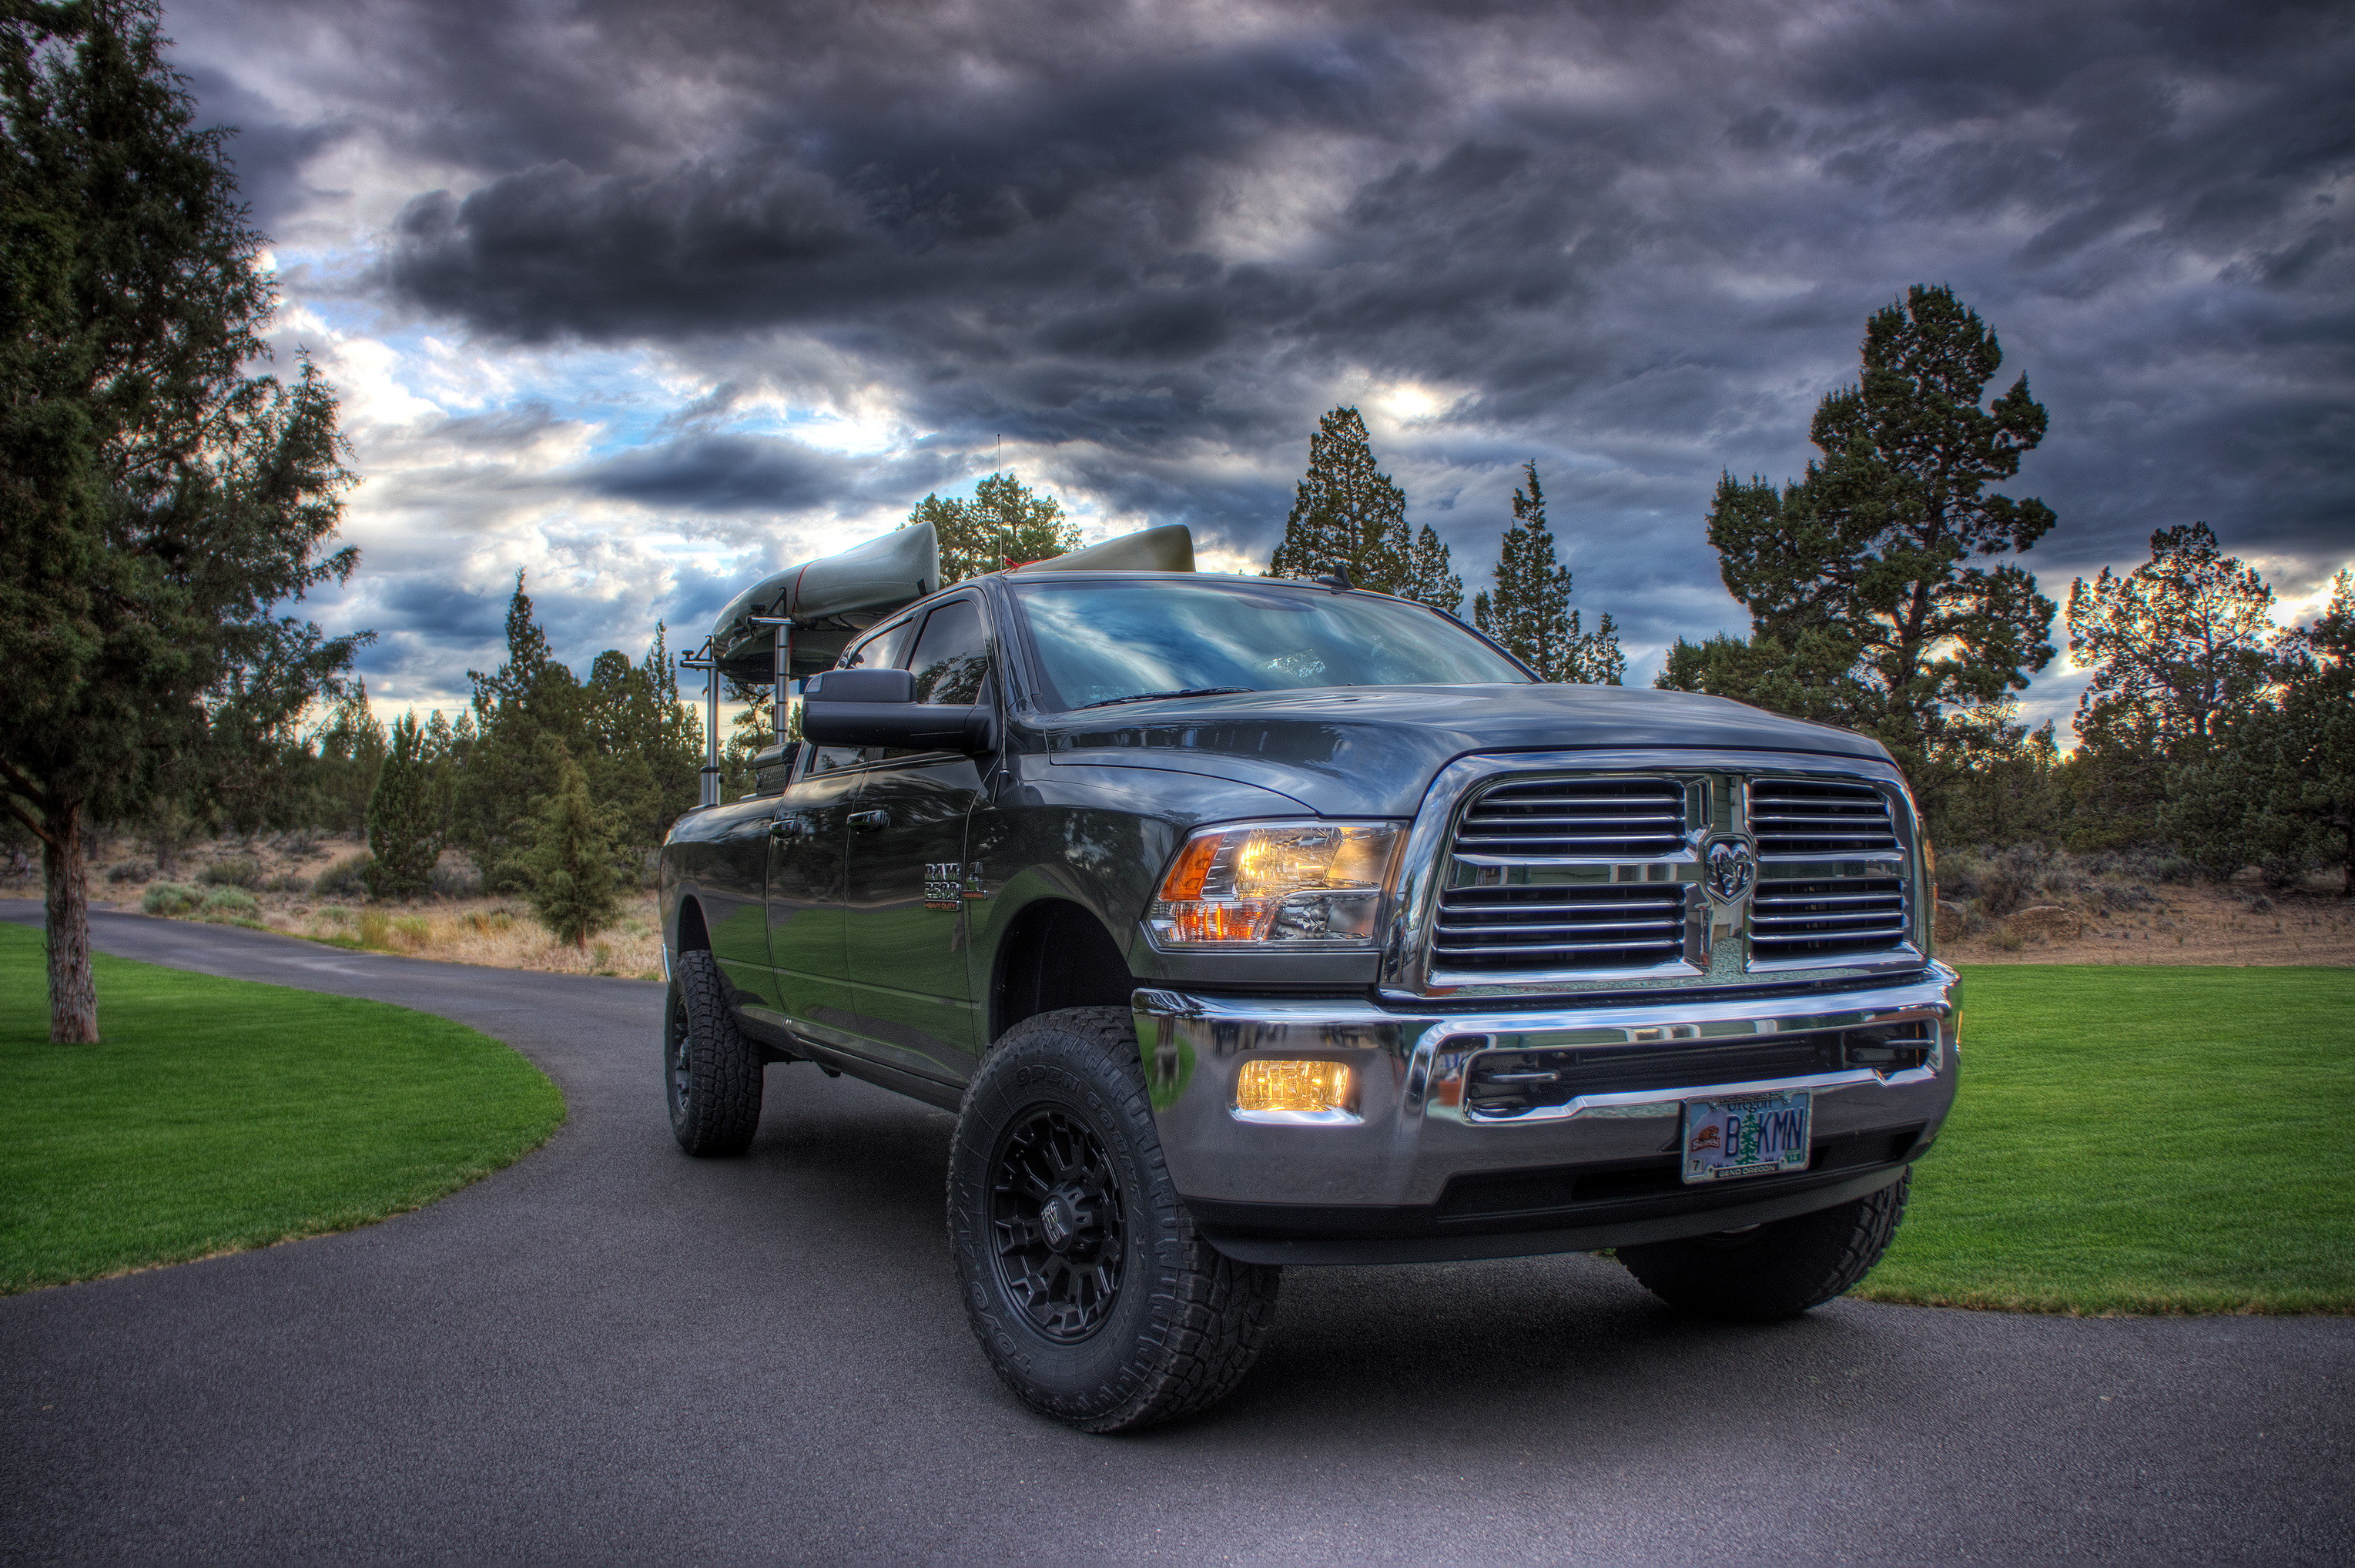 3058x2036 wallpaper.wiki-Backgrounds-Dodge-Ram-Car-PIC-WPB009308